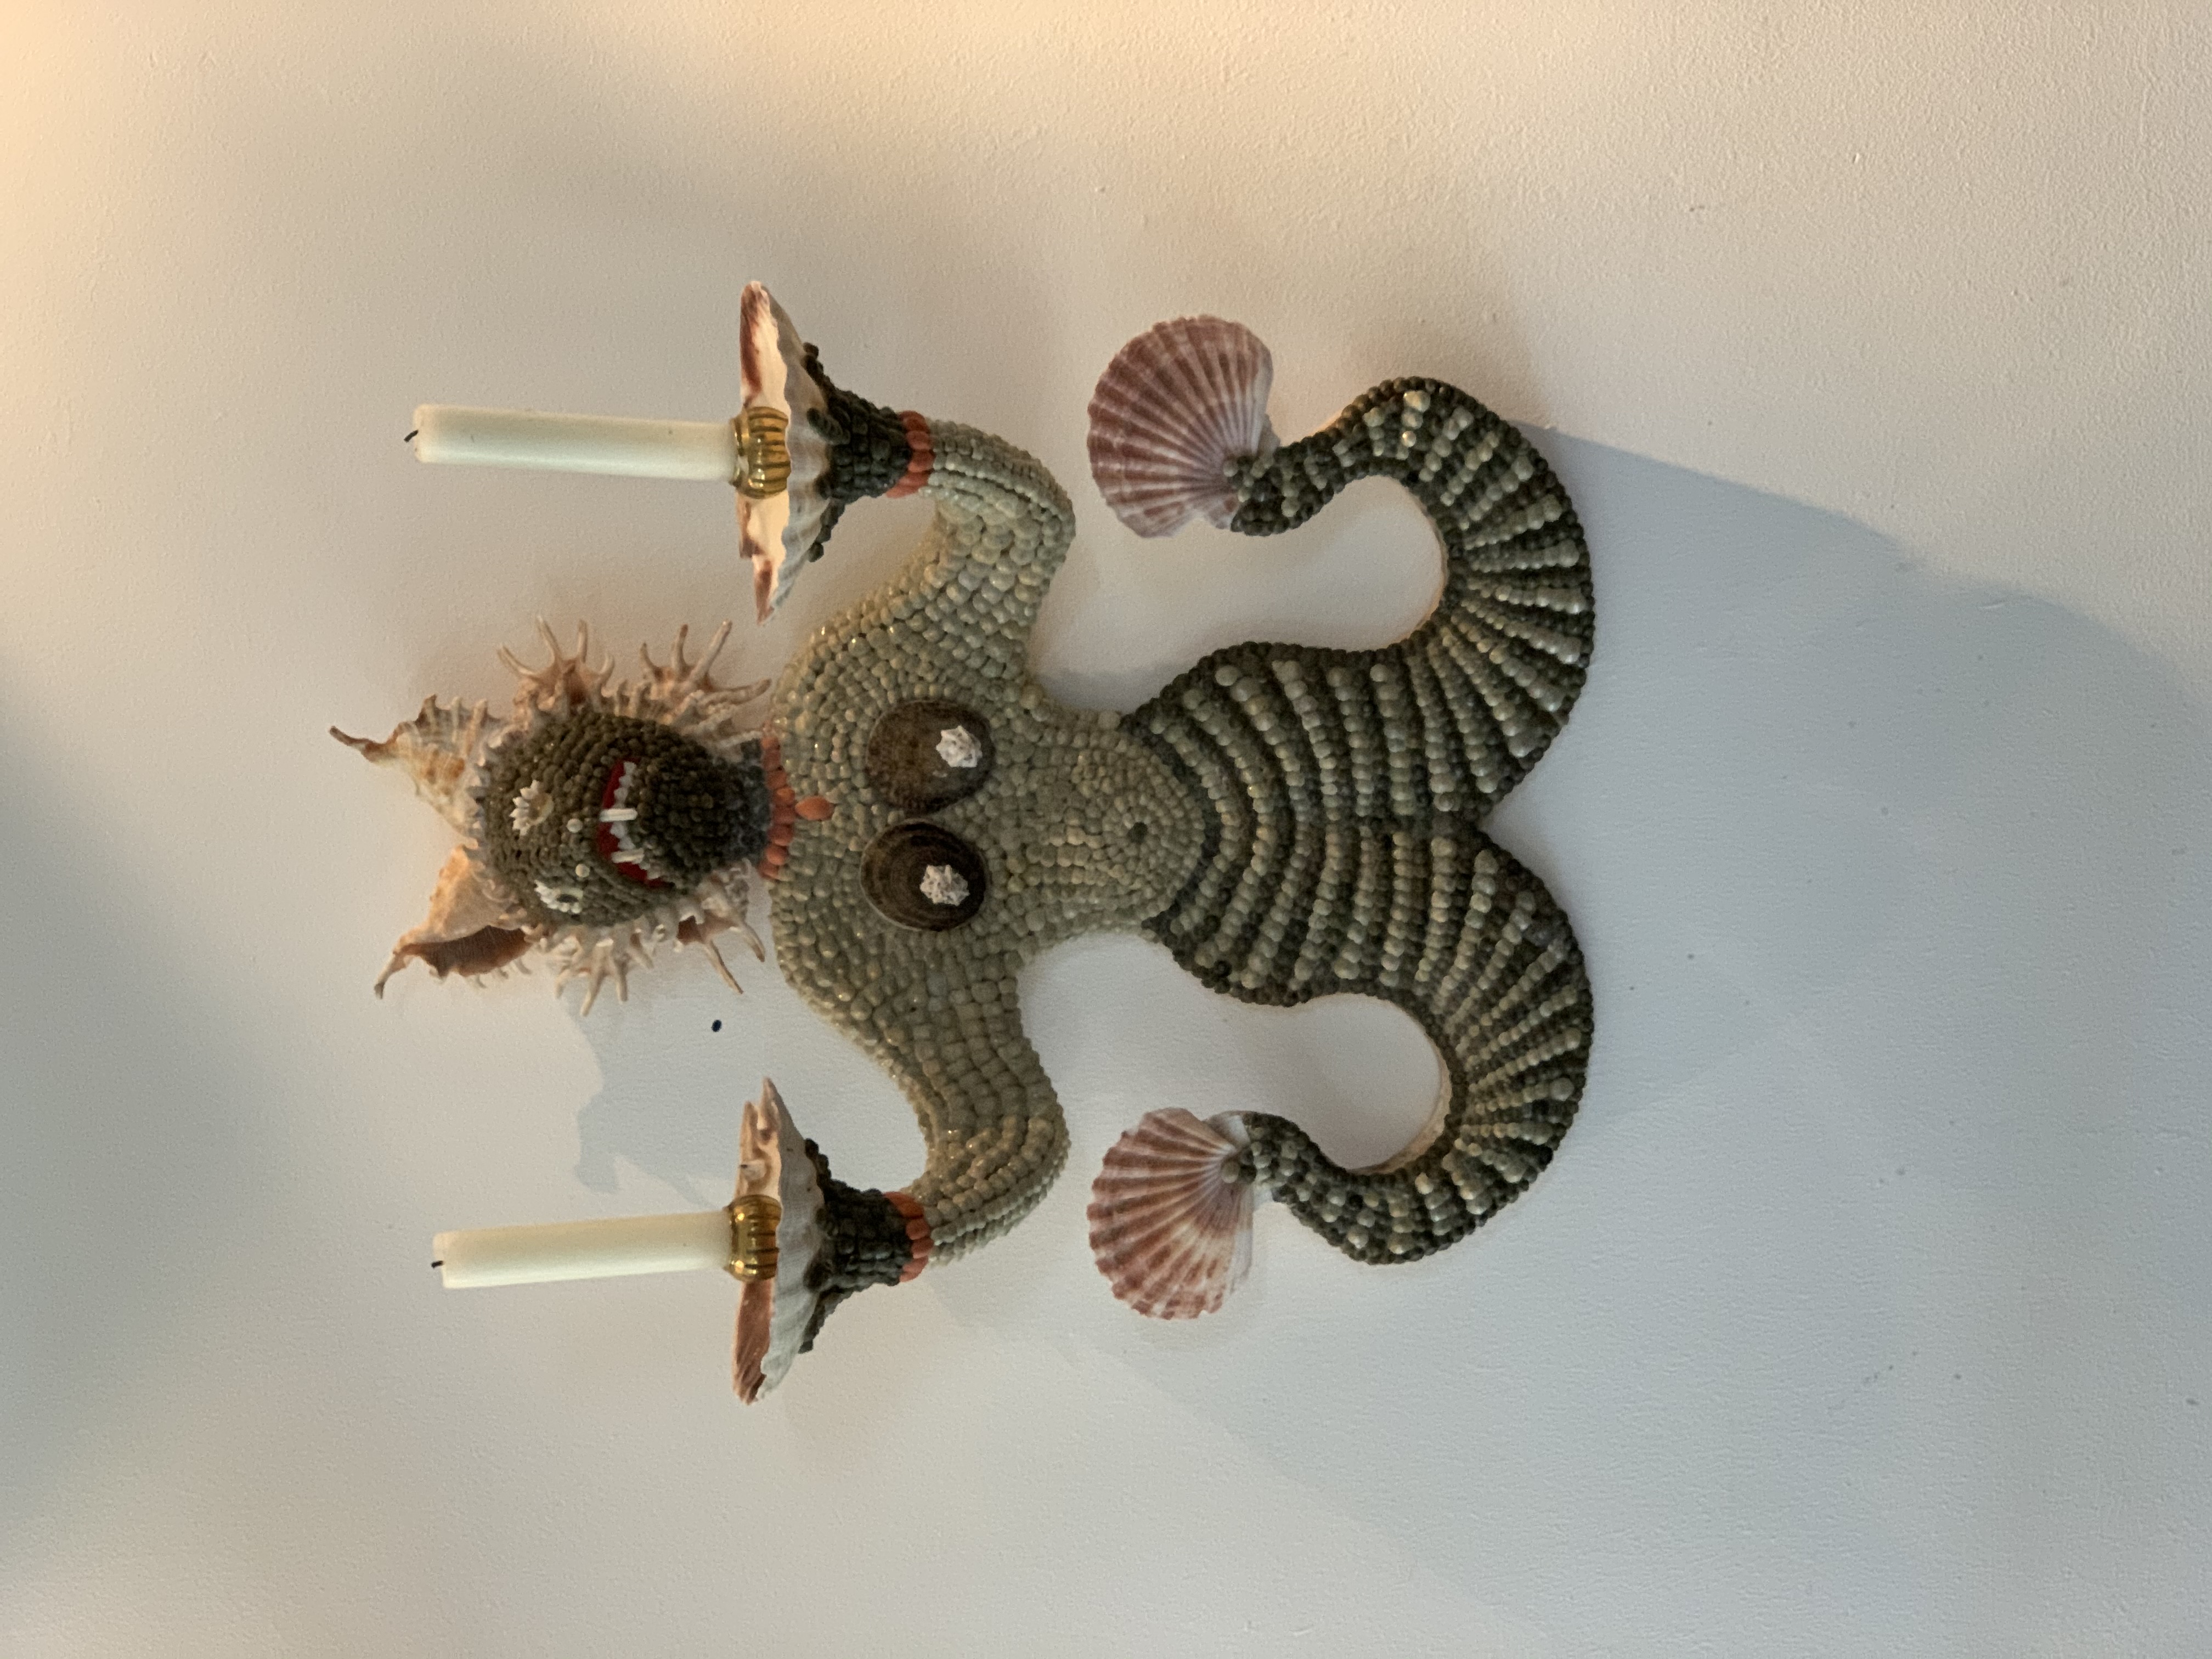 A PAIR OF SHELLWORK WALL SCONCES MODELLED AS GROTESQUES - Image 3 of 4